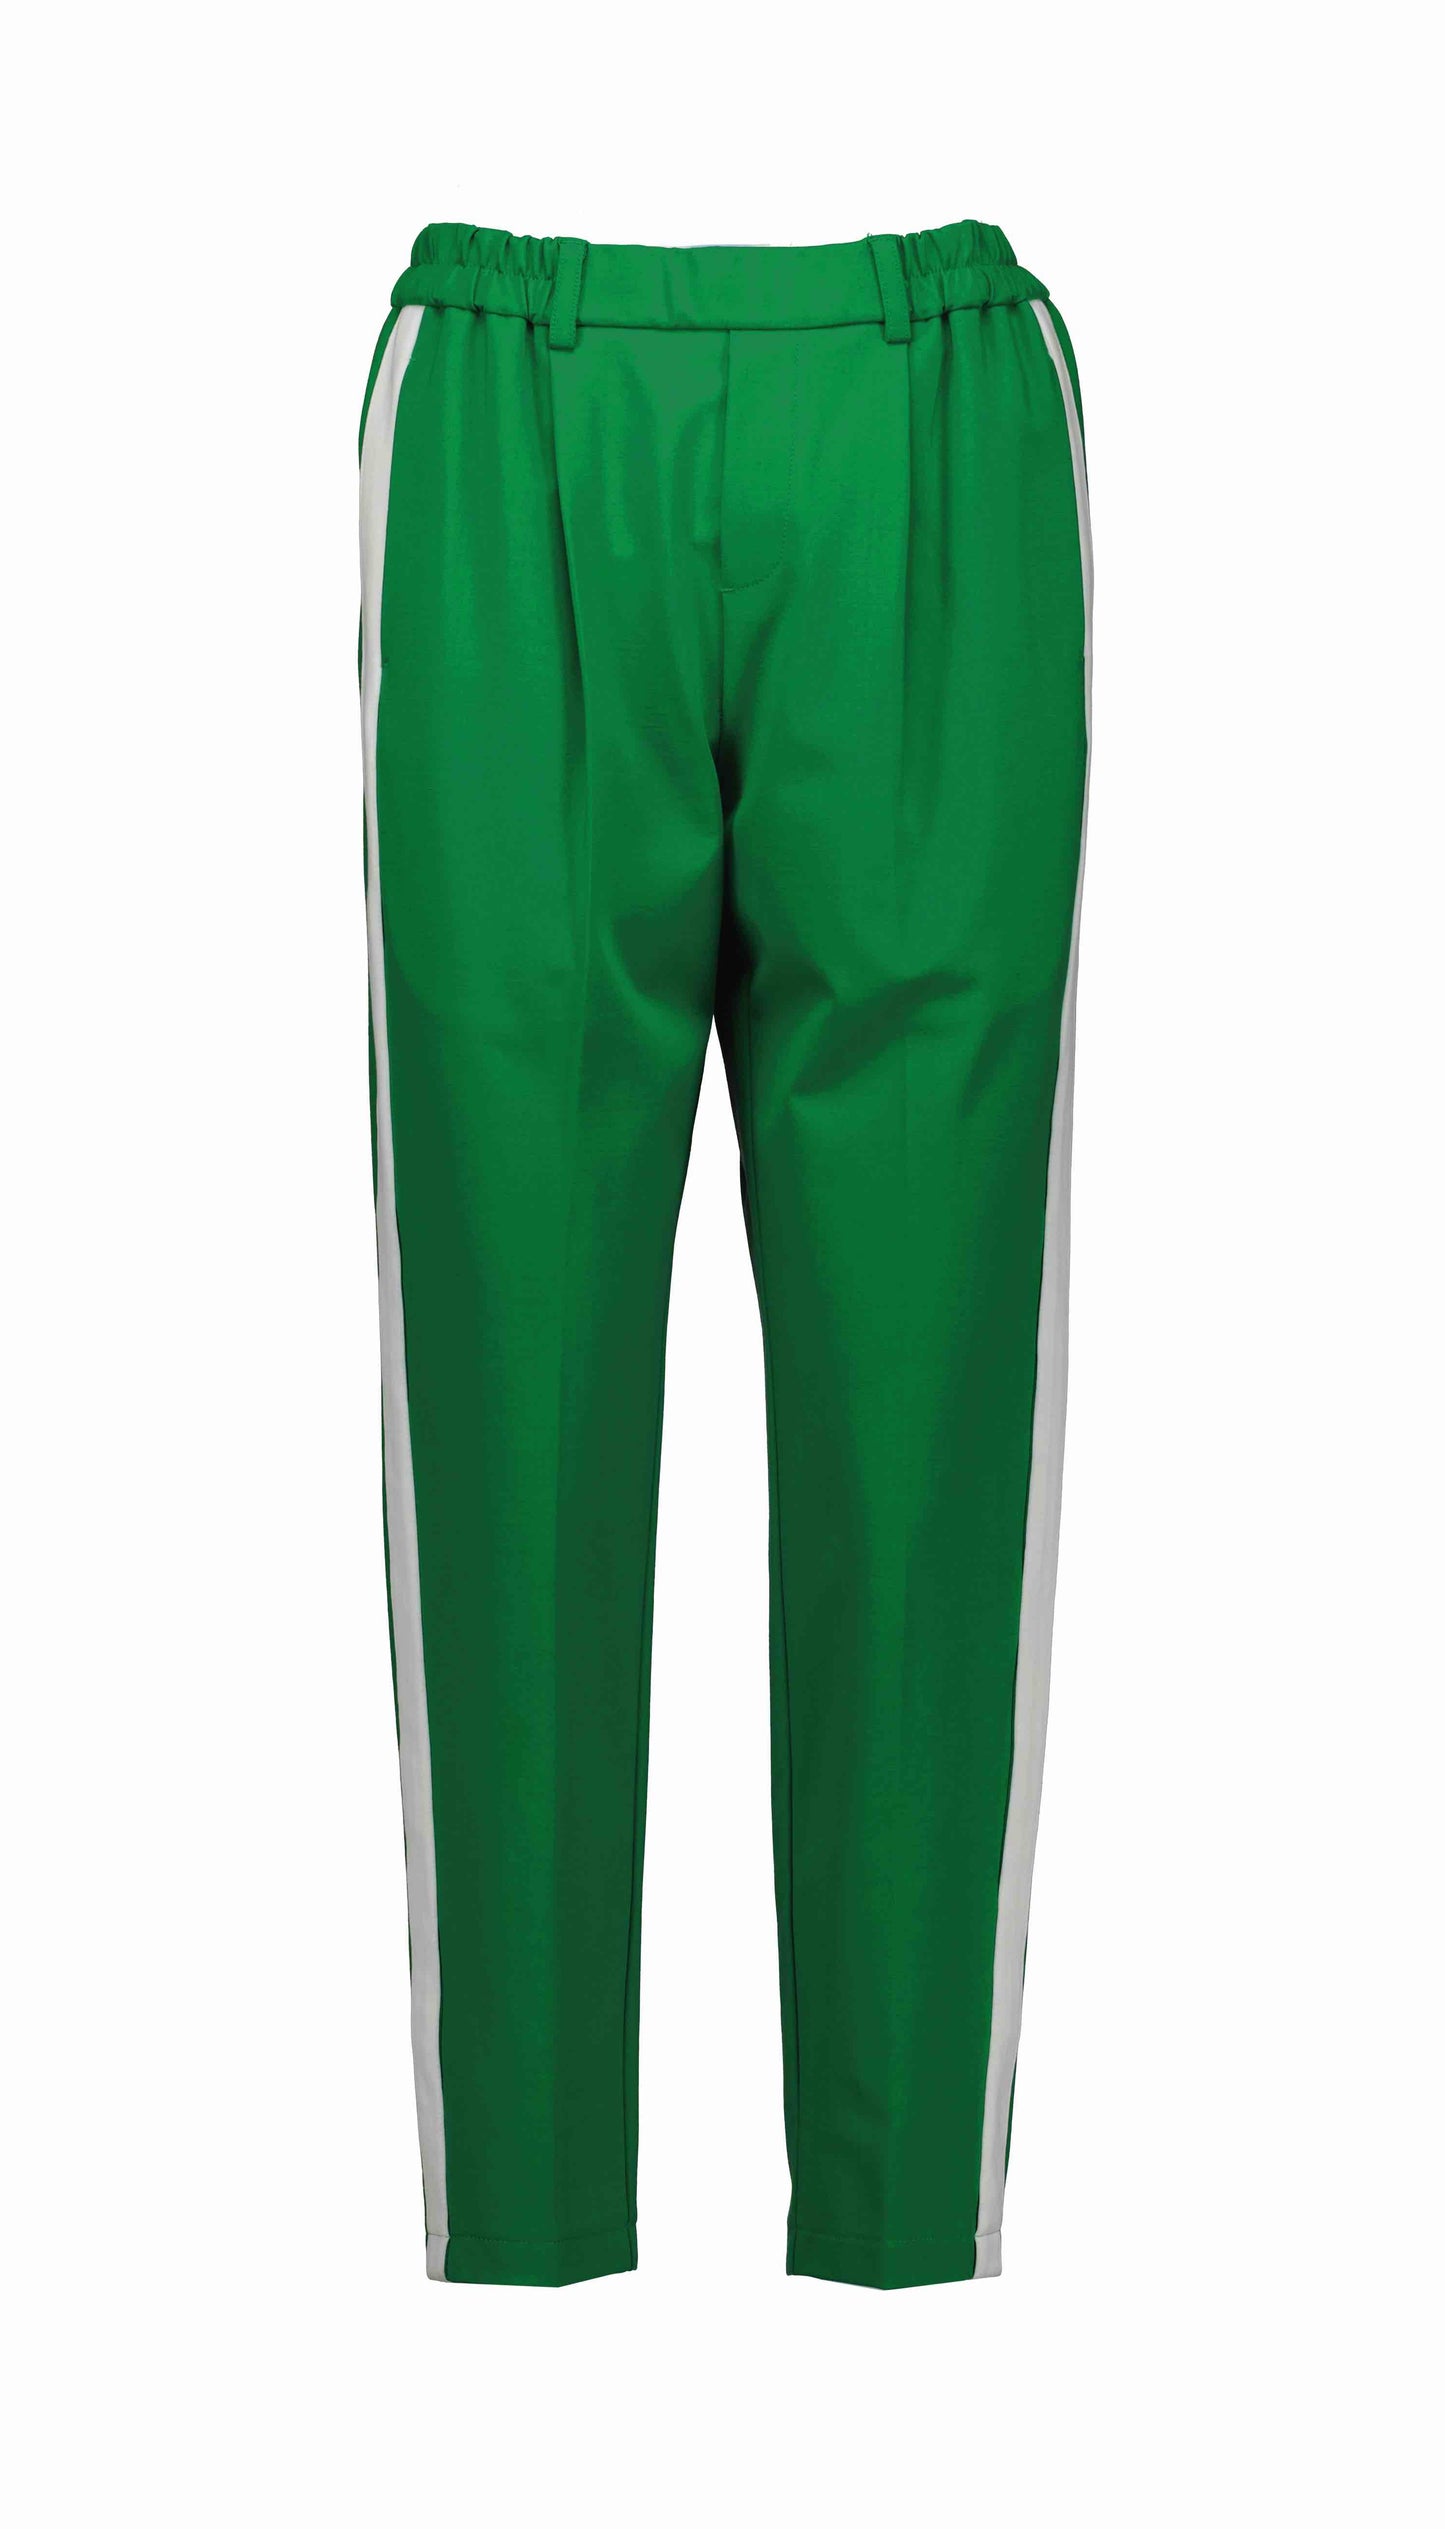 Bobbie Pants - Green and White